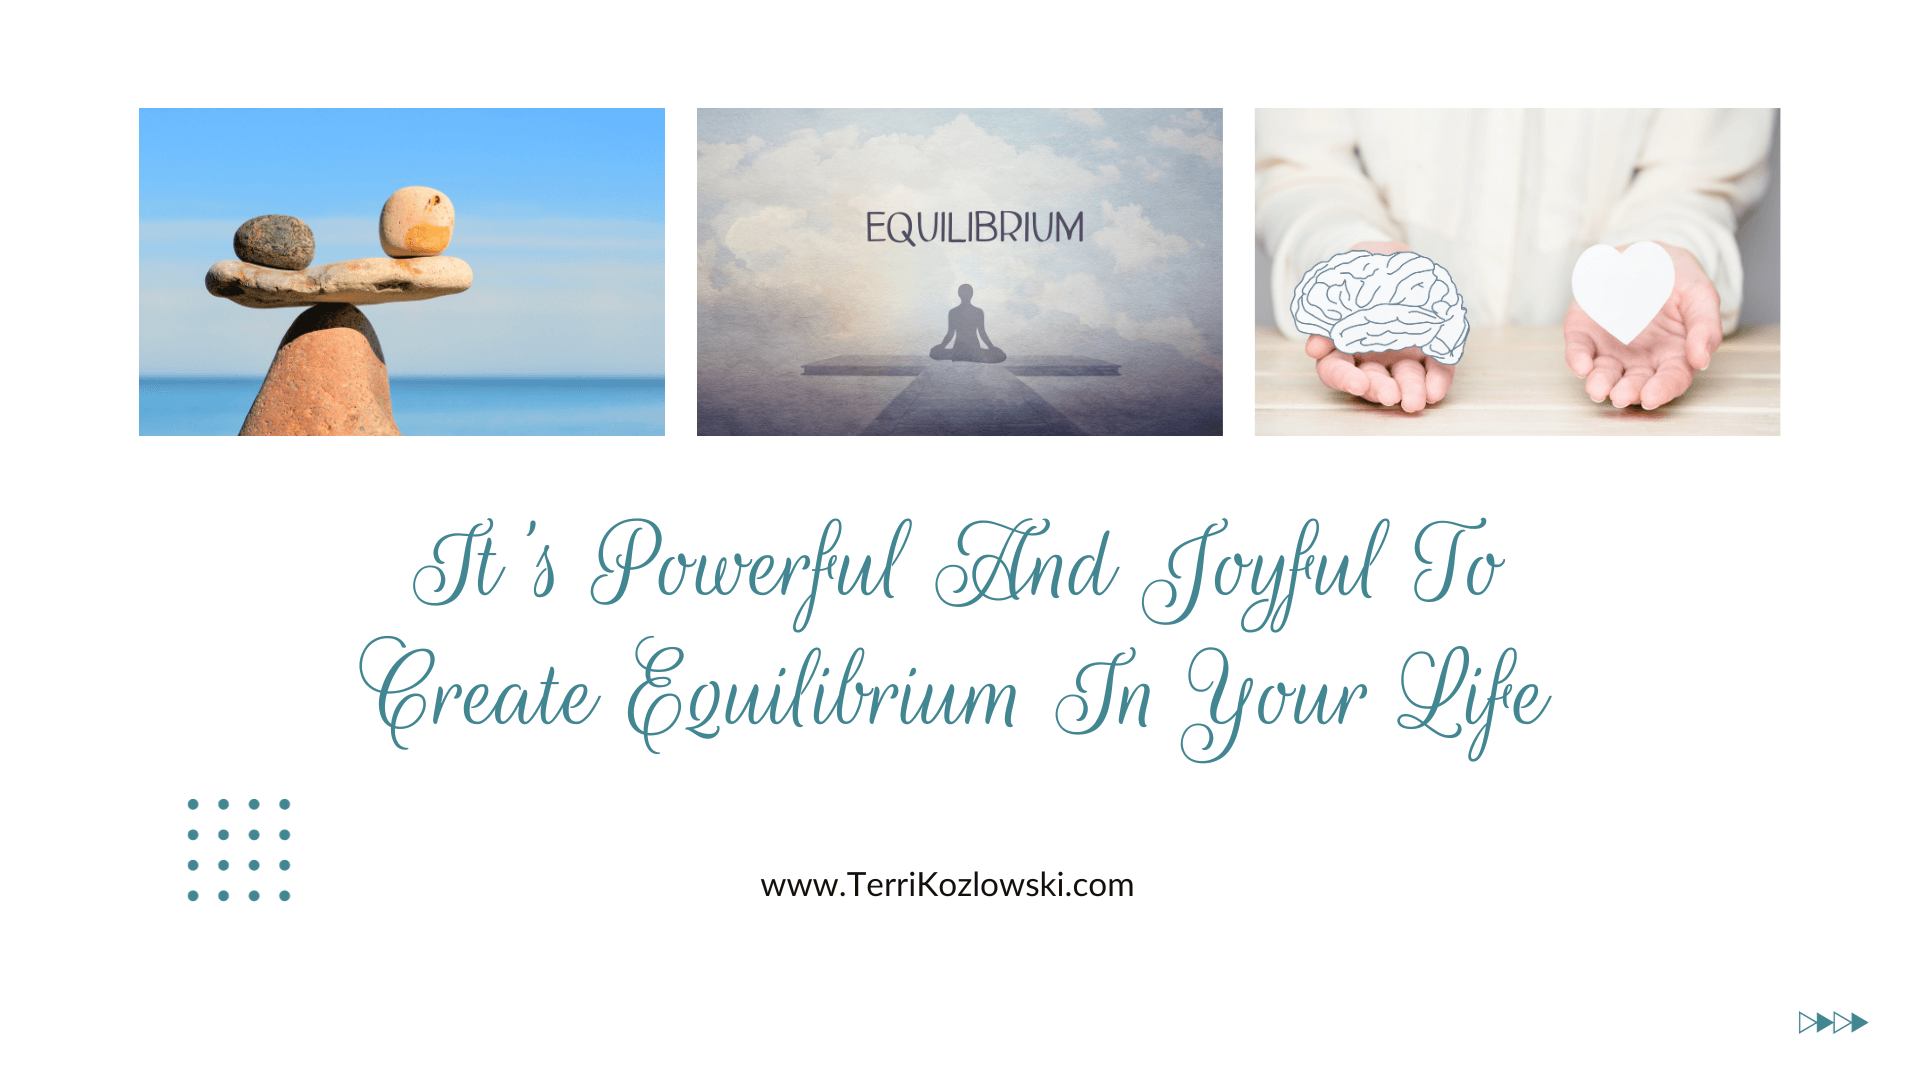 It's Powerful And Joyful To Create Equilibrium In Your Life